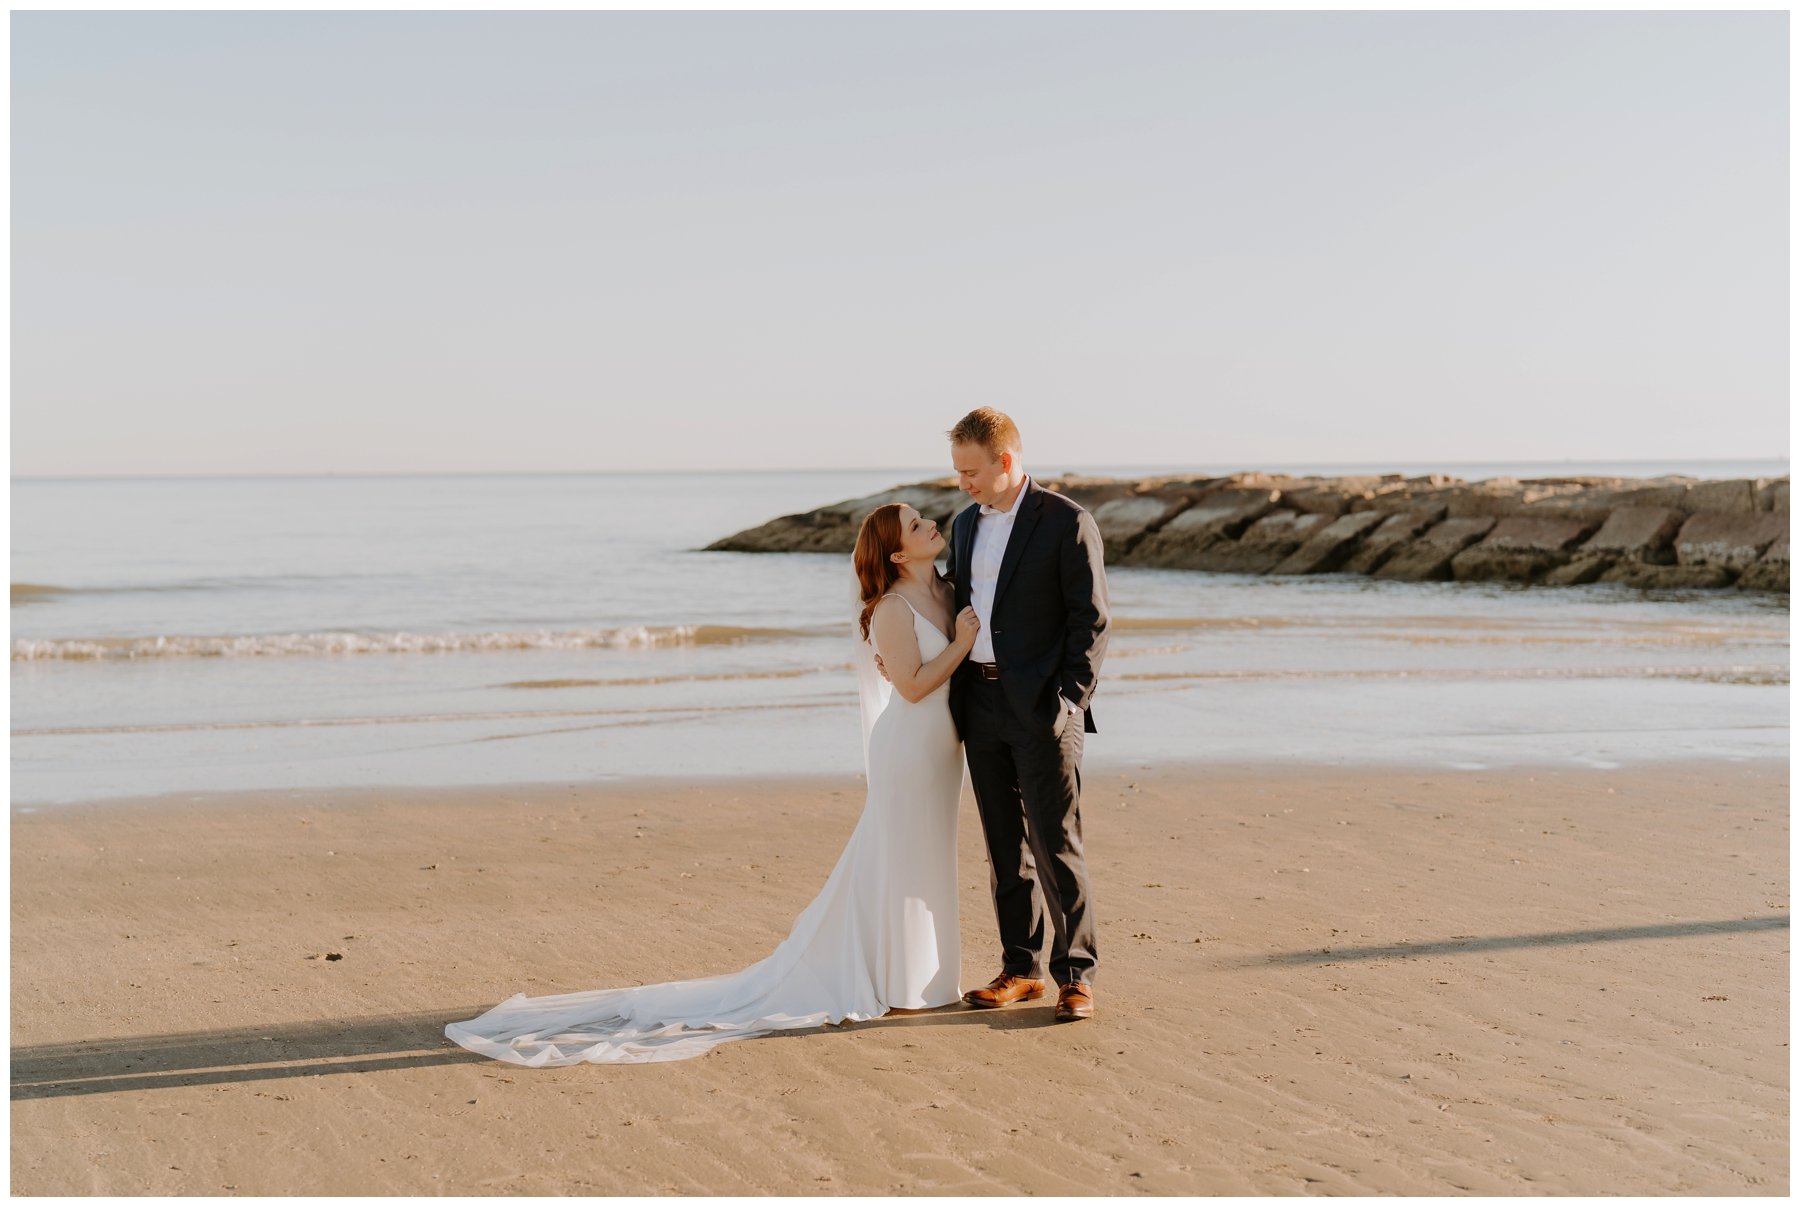 Beach Elopement at Sunset with Officially Oaks | Ashley Medrano Photography | Galveston Texas Beach Elopement | via ashleymedrano.com